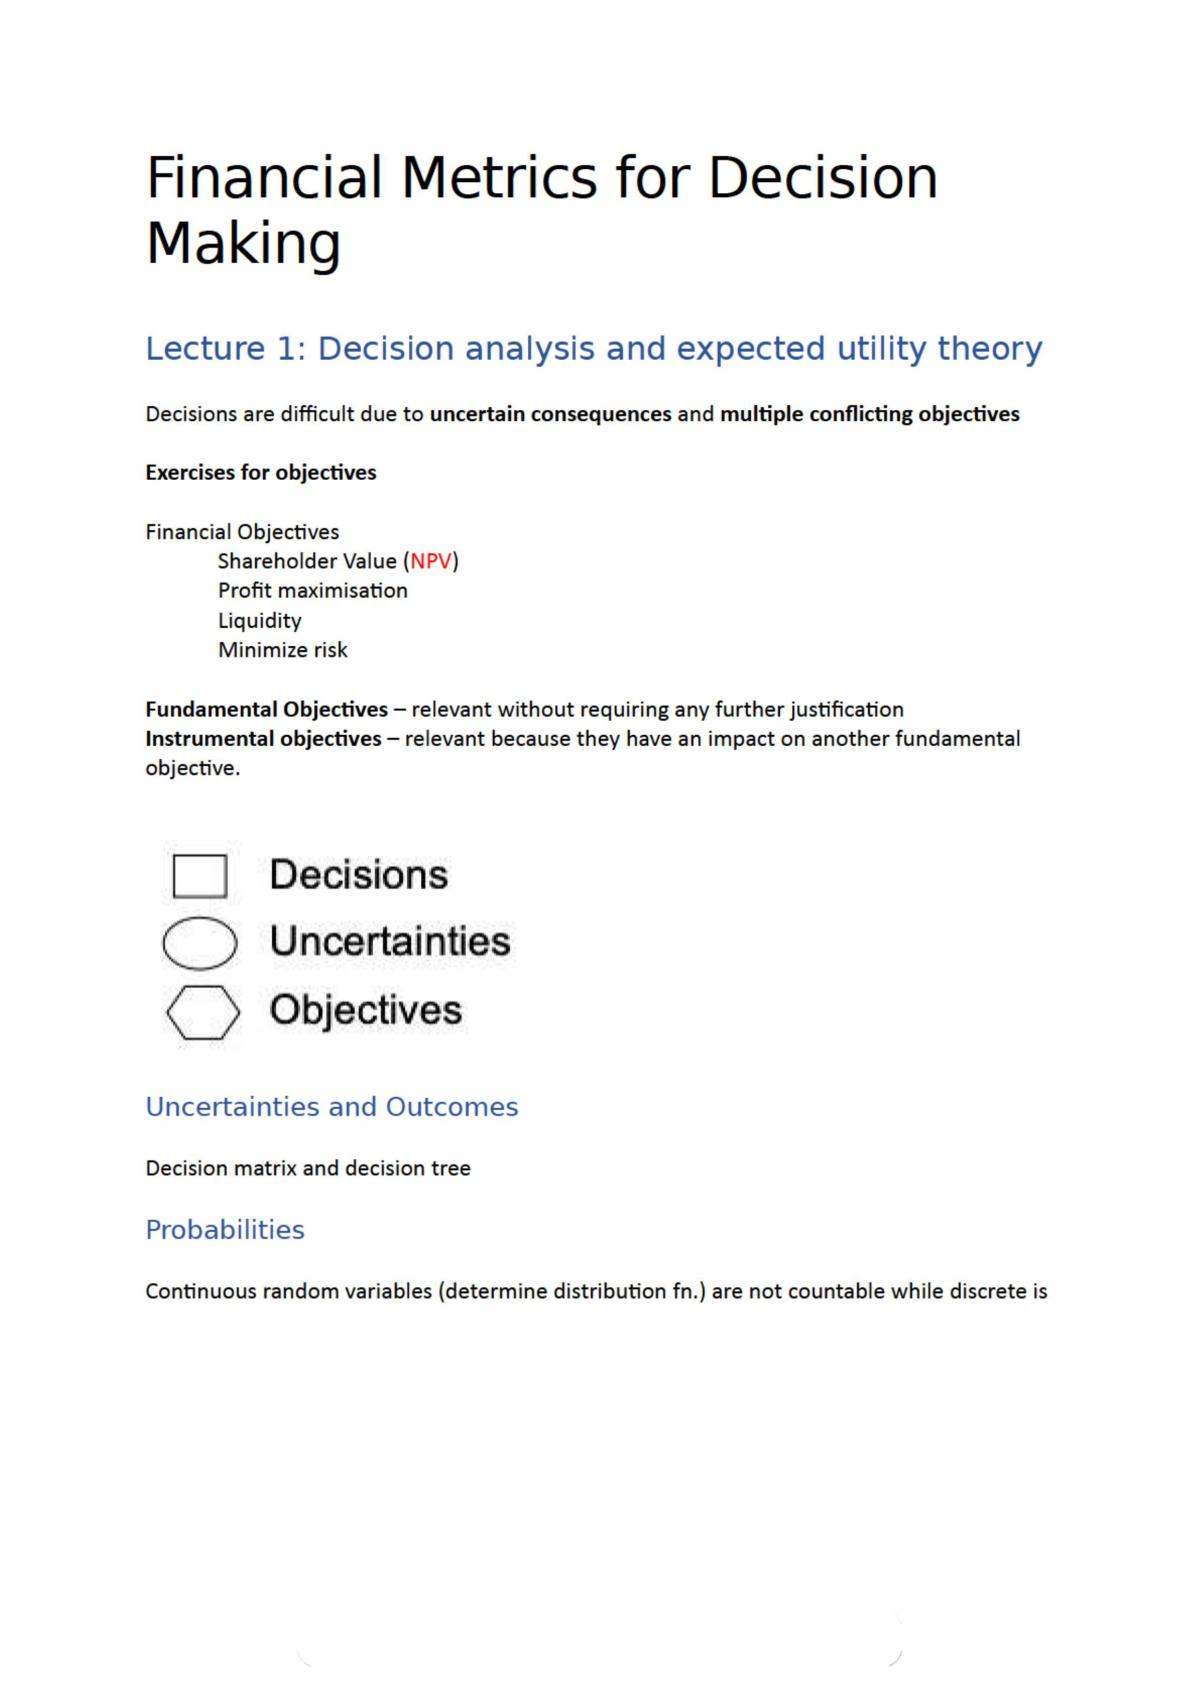 Financial Metrics for Decision Making Notes - Page 1